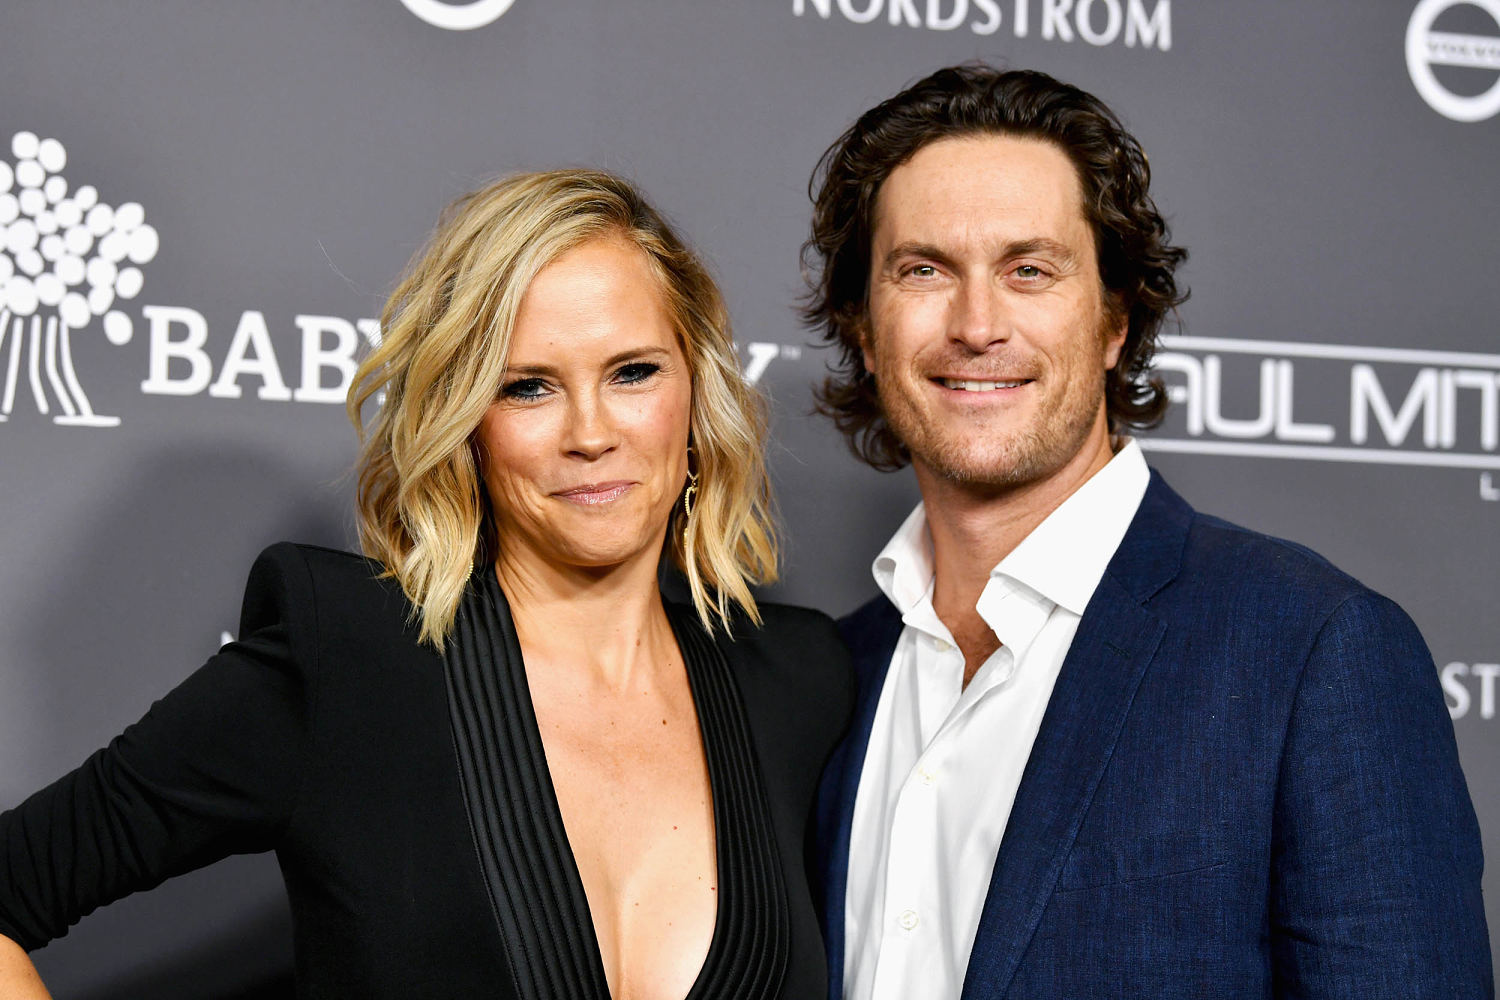 oliver hudson explains why he came clean after he cheated on his wife before their wedding: ‘i told her everything’